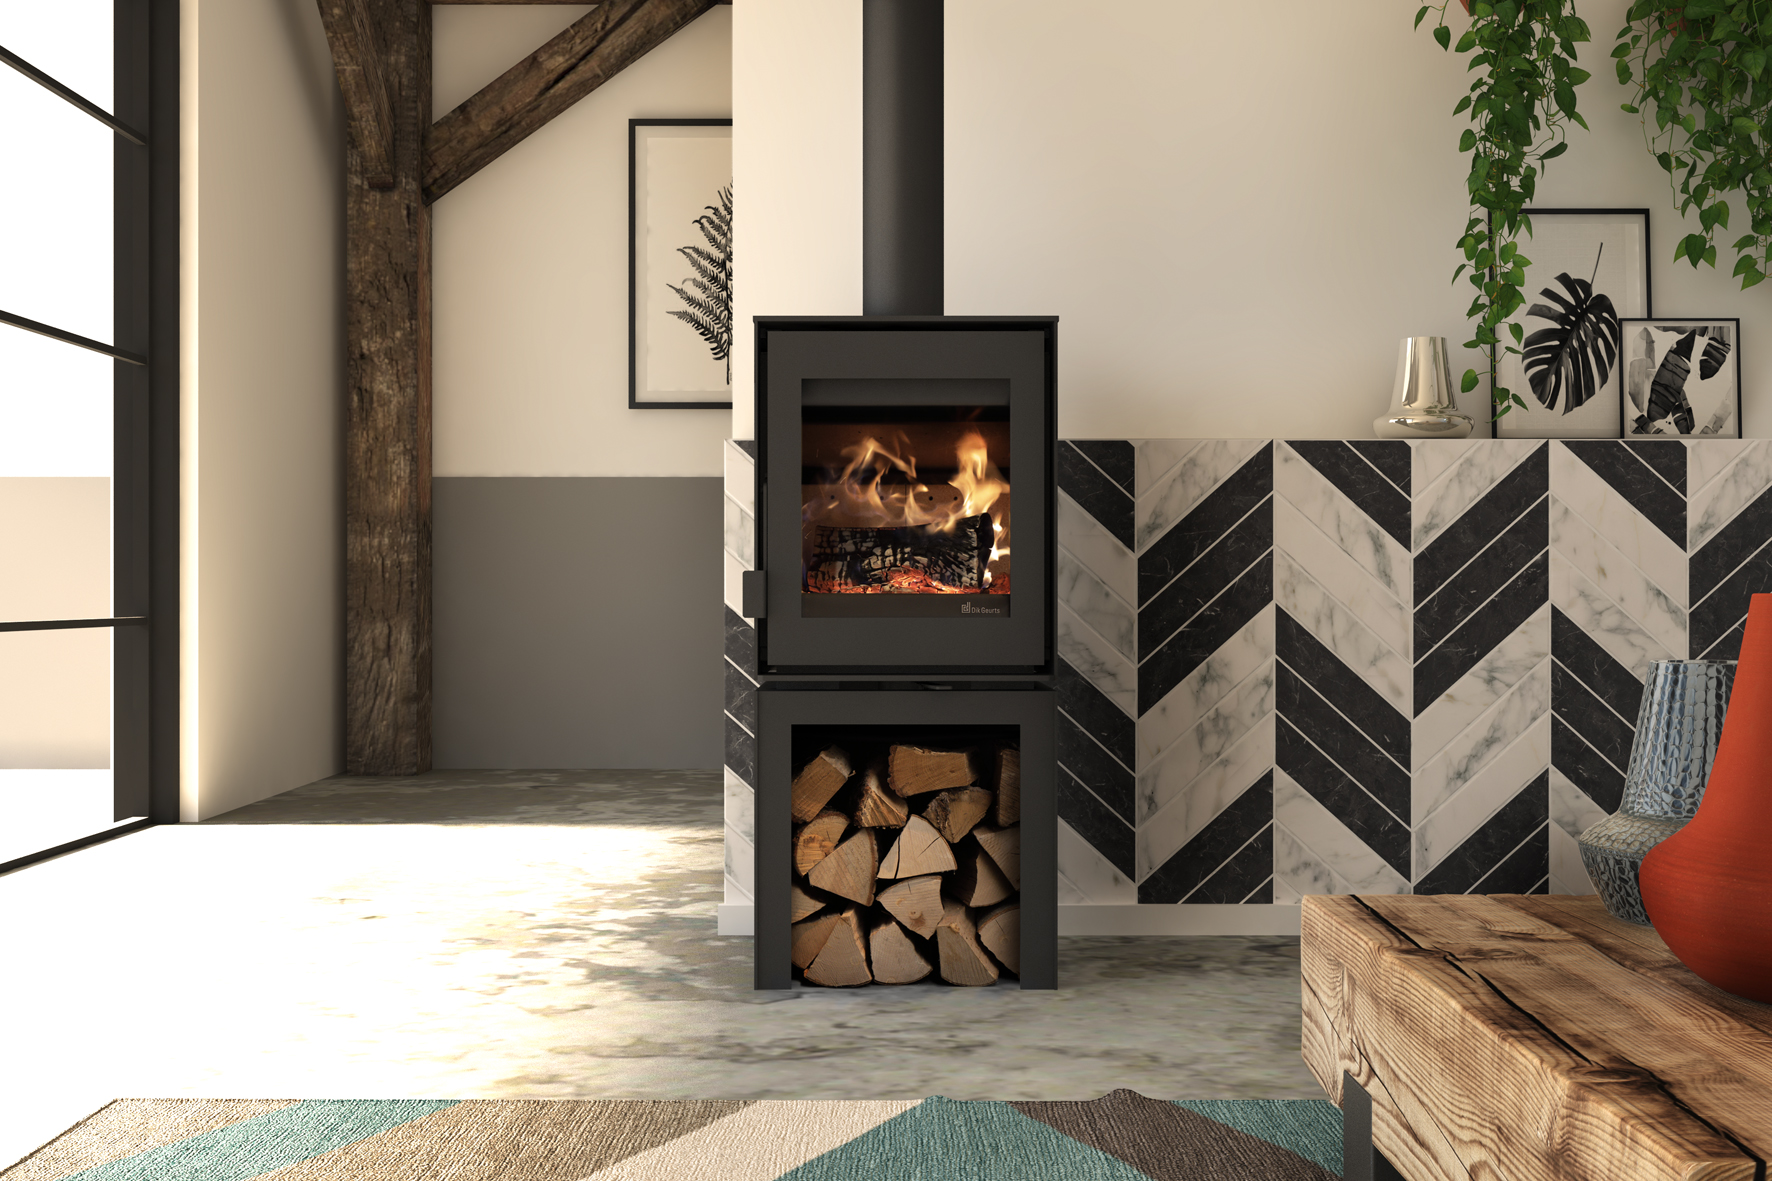 DRU Fires unveils new products for winter 2019